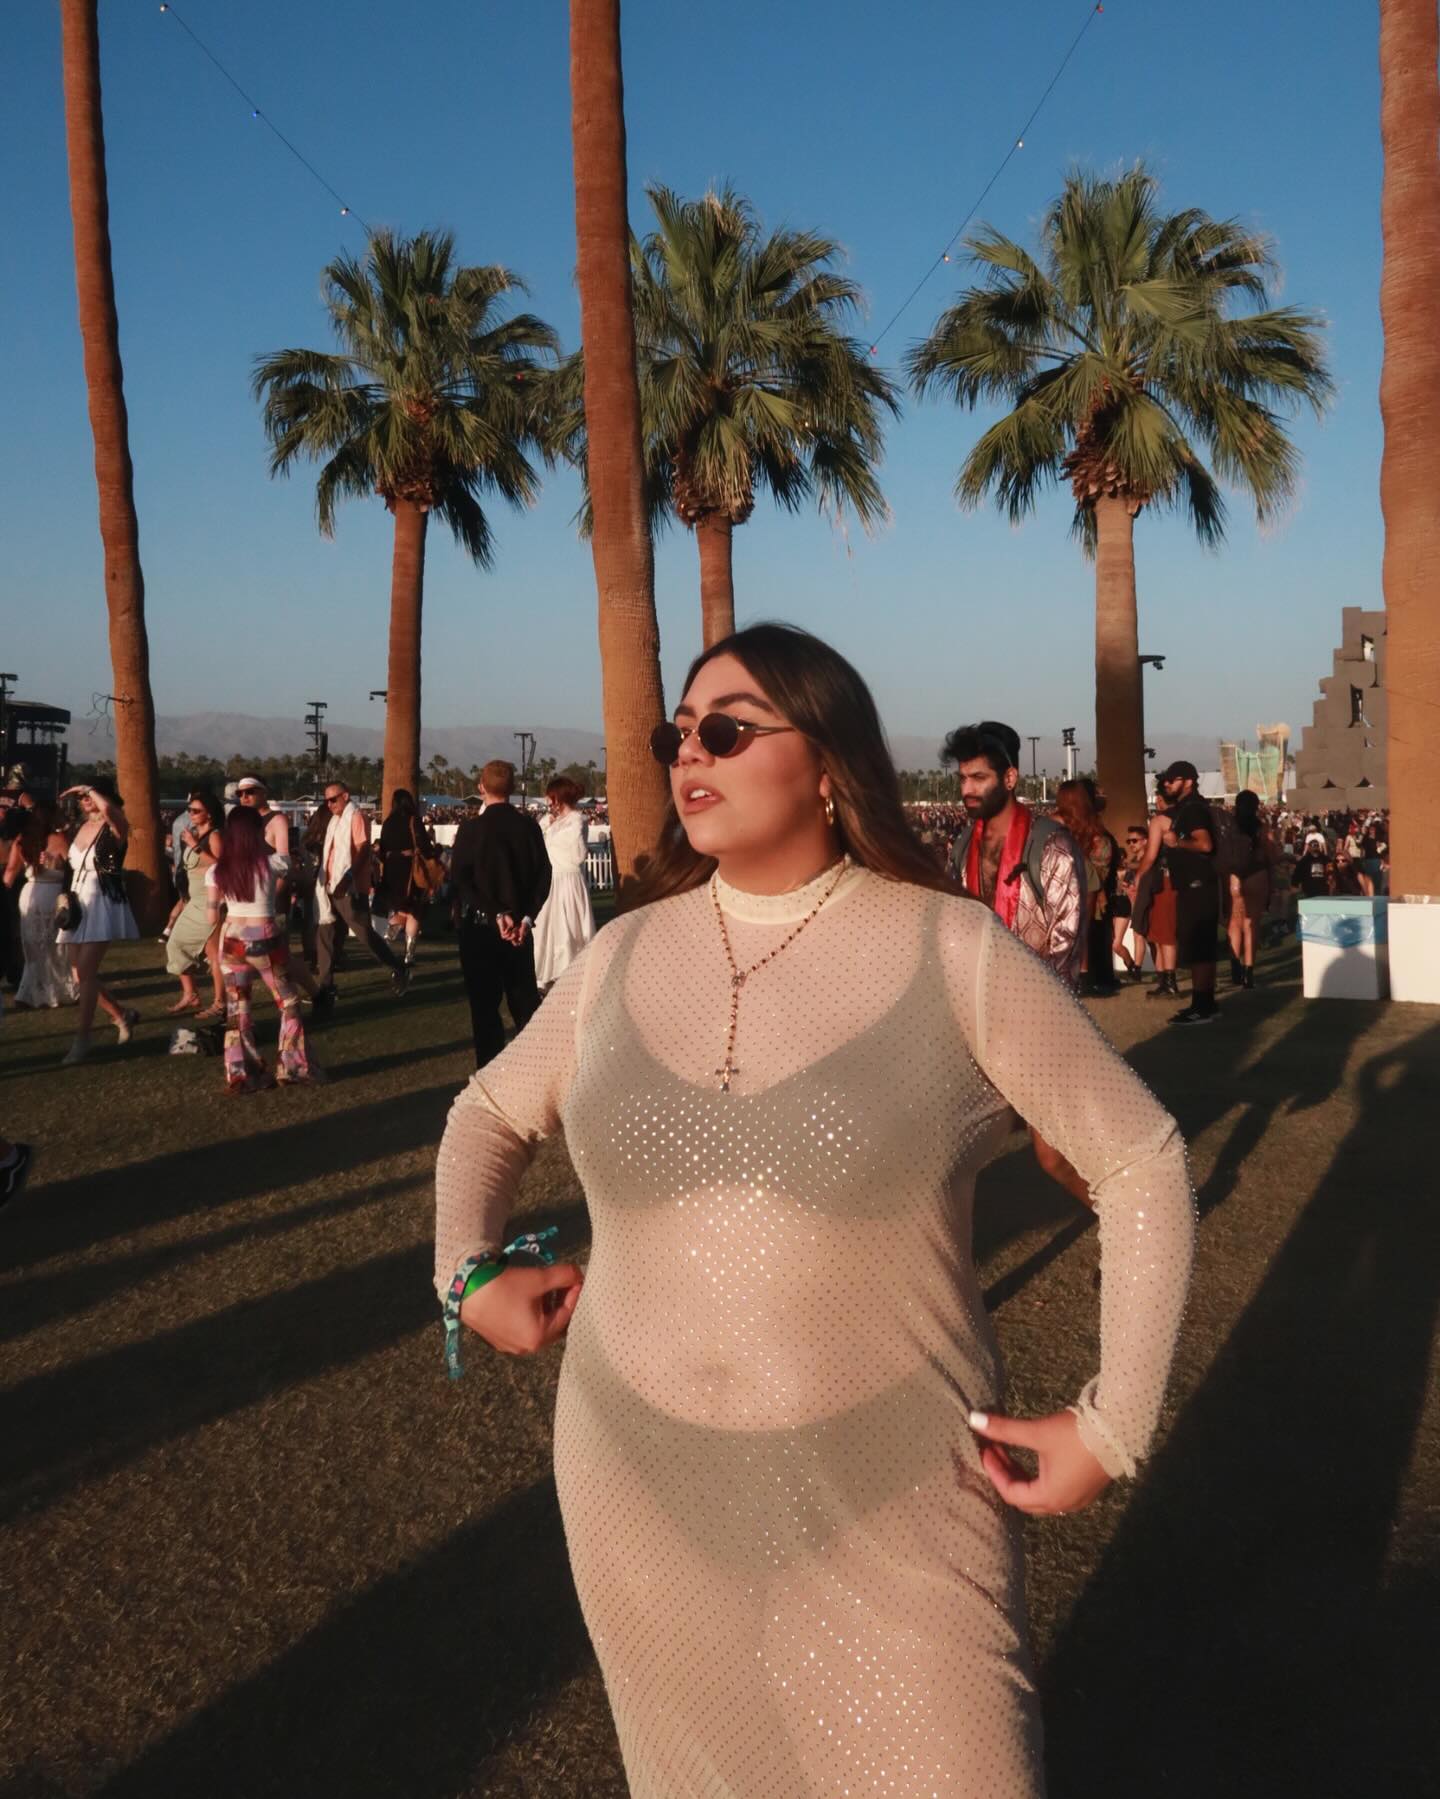 Influencer at Coachella wearing bedazzled sheer dress with black bra, black underwear and round sunglasses.